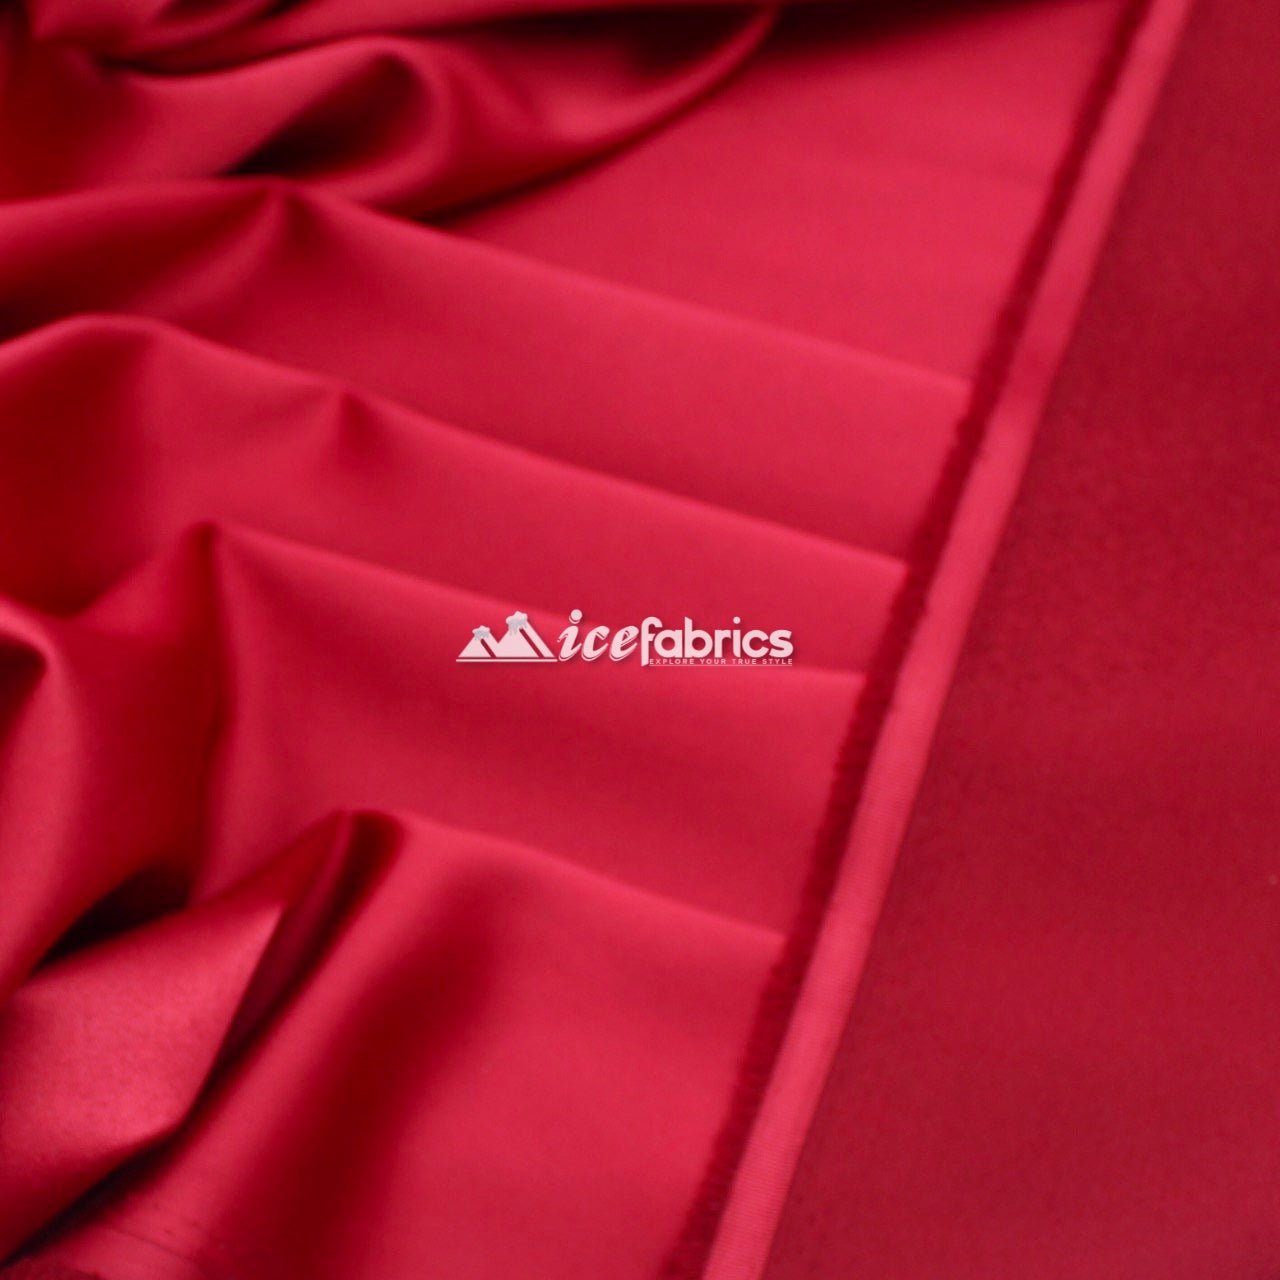 Armani Thick Solid Color Silky Stretch Satin Fabric Sold By The YardSatin FabricICE FABRICSICE FABRICSBurgundyArmani Thick Solid Color Silky Stretch Satin Fabric Sold By The Yard ICE FABRICS Red